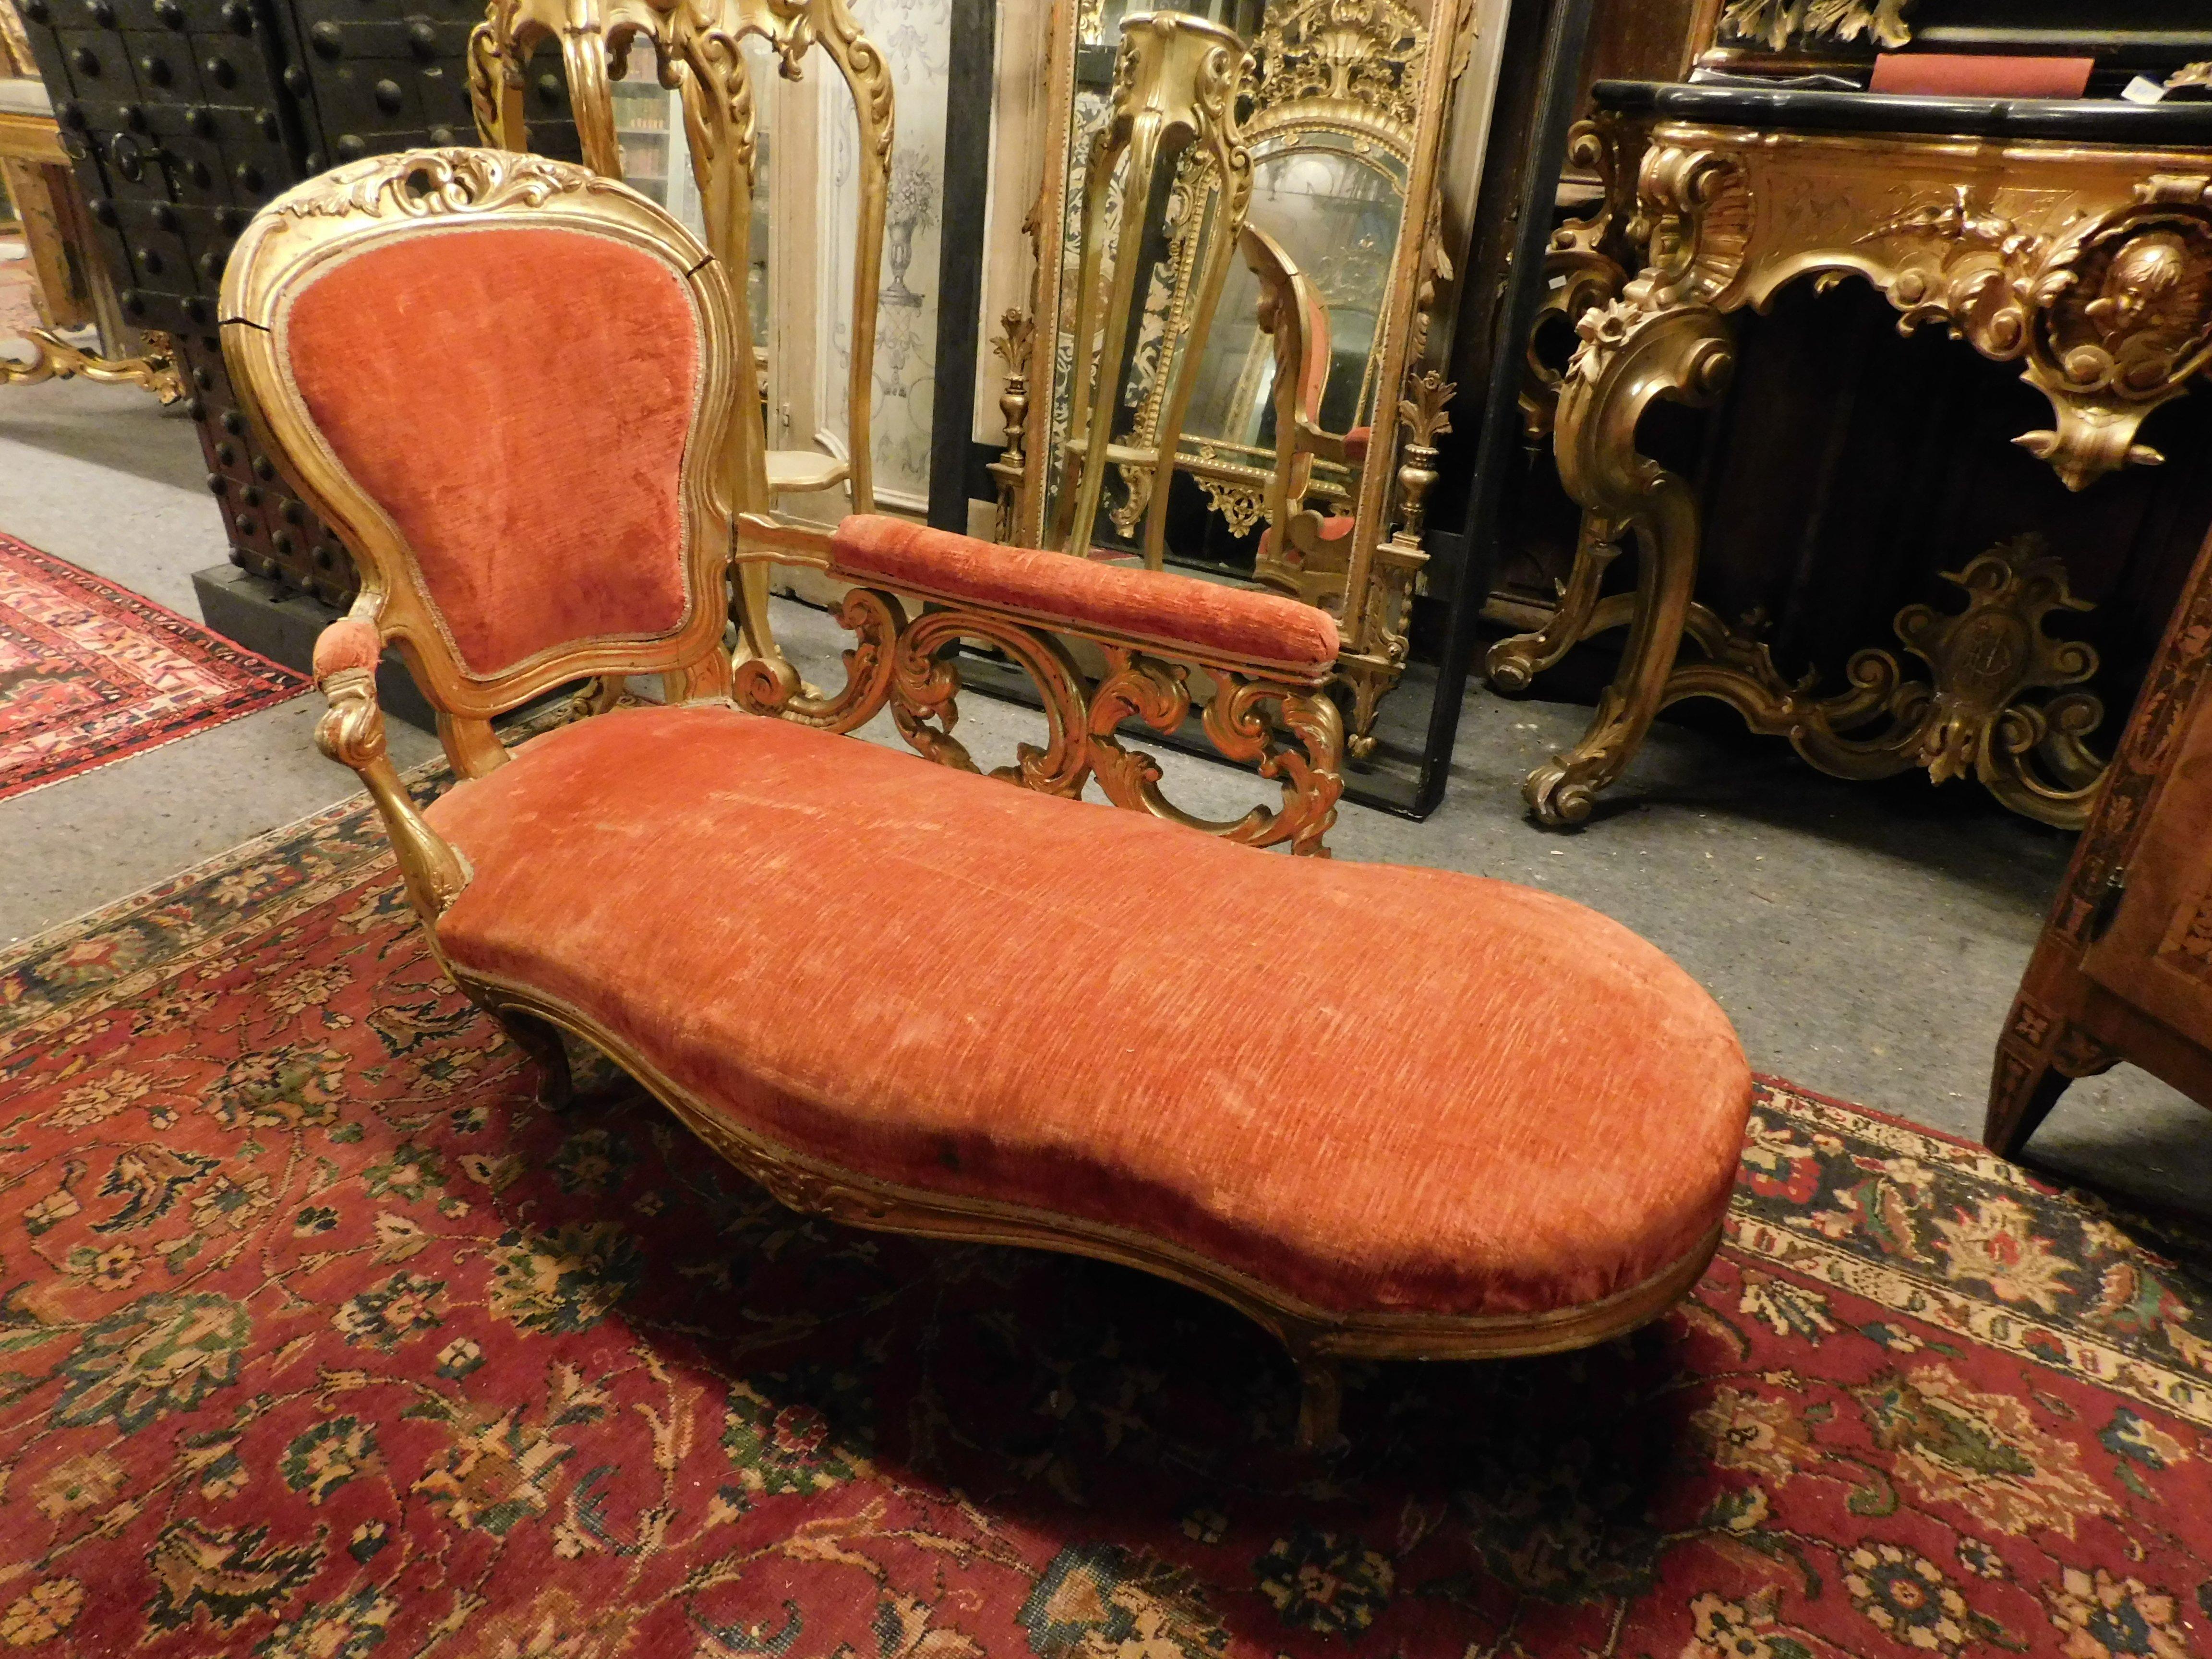 Ancient Dormeuse, relaxing sofa, chaise longue in carved and gilded wood, red velvet fabric, built for the living room of nobles in France in the 19th century, maximum dimensions cm W 170 x H 95 x D 65, from the ground to the seat h 30 cm .